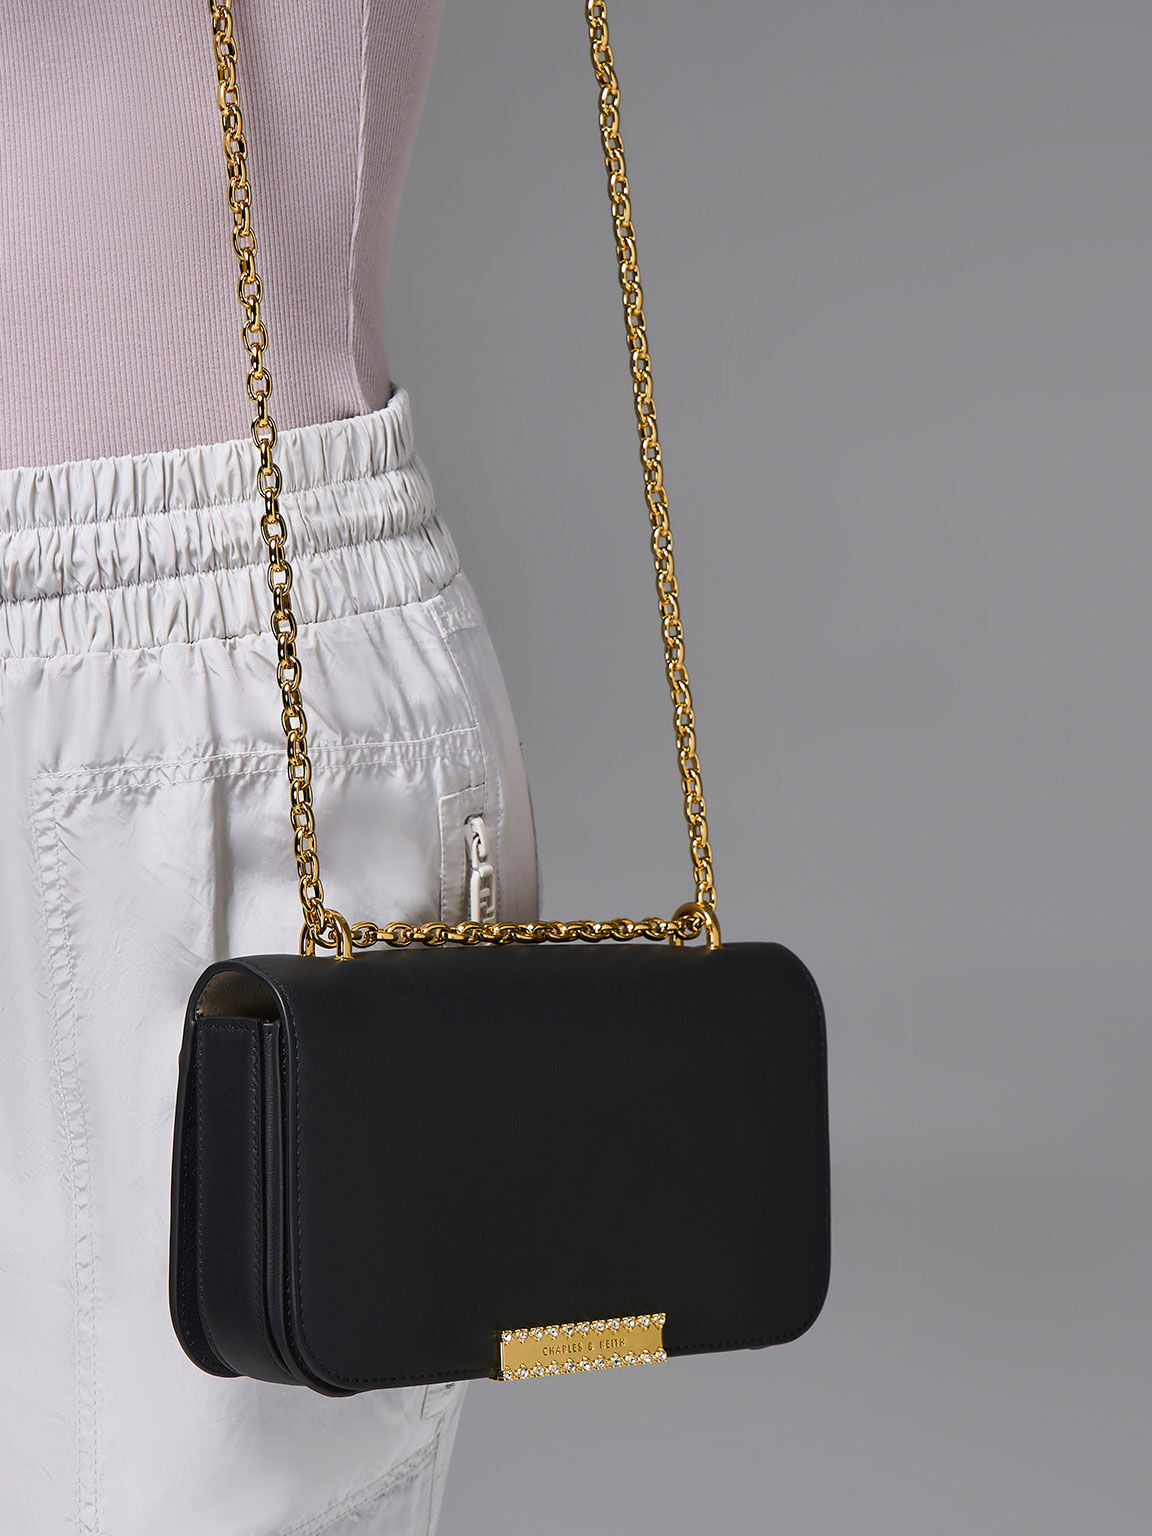 Black Leather-Look Chain Strap Clutch Bag